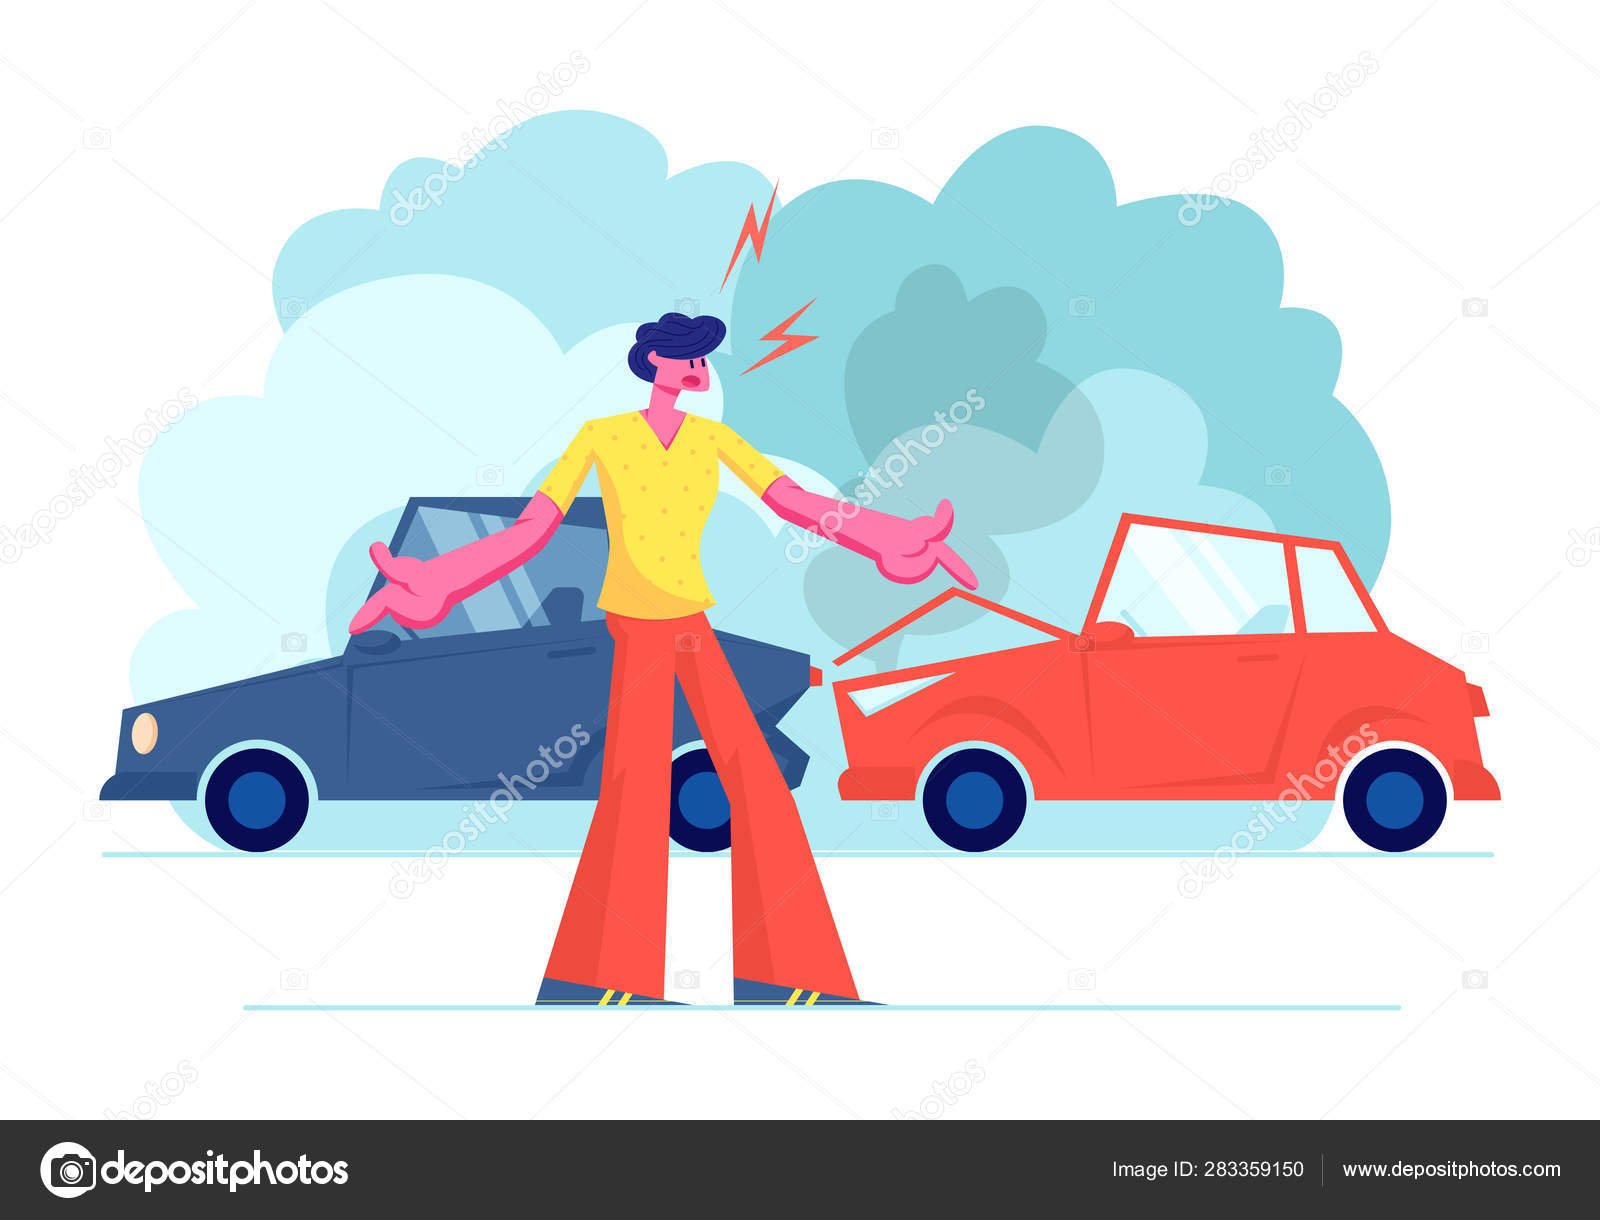 Cartoon vector illustration of car accident, crashing into the